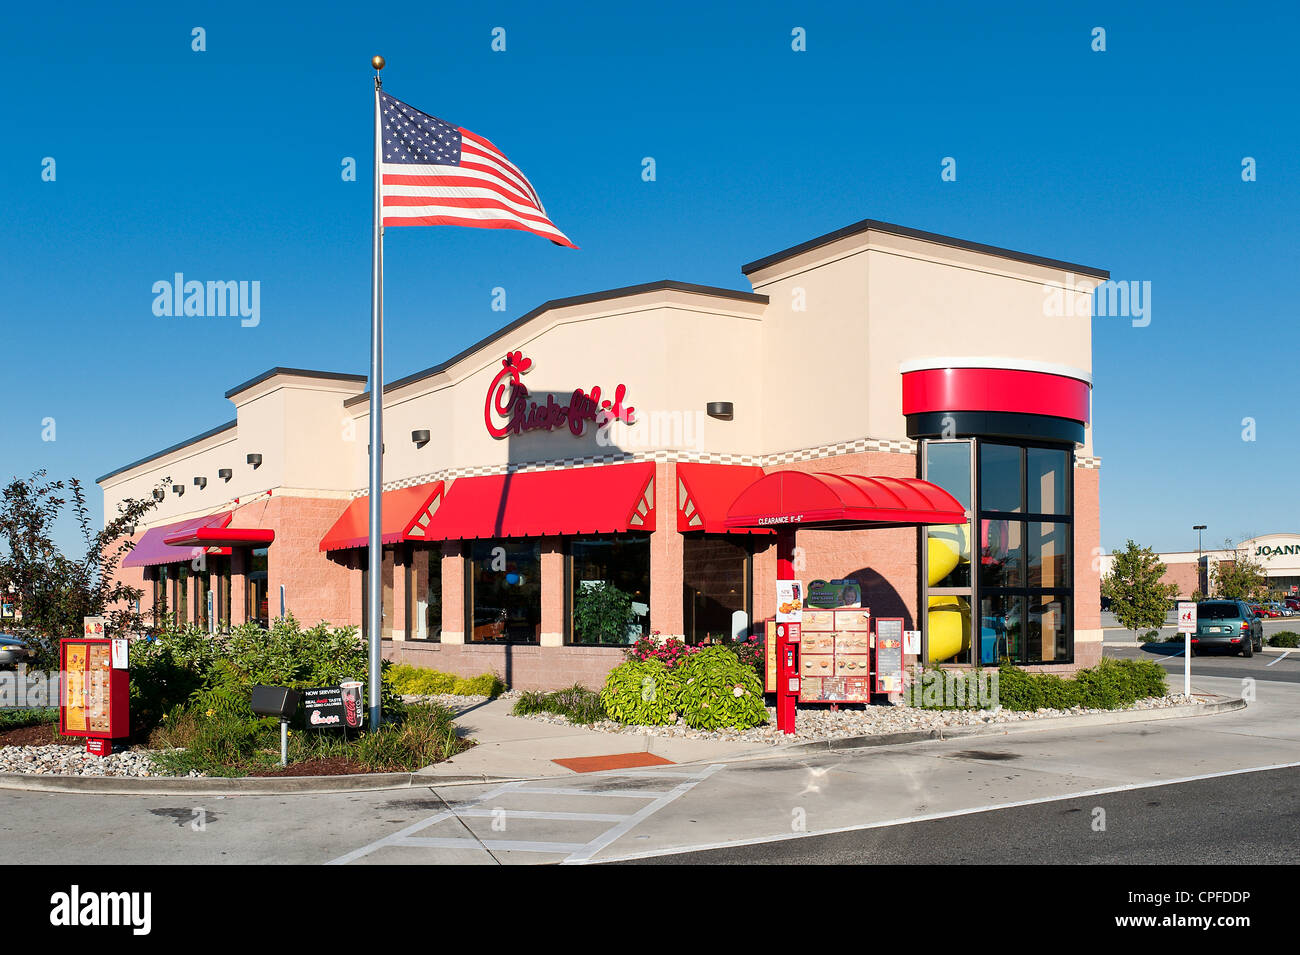 Chickfila fast food restaurant. Chick Fil A Stock Photo